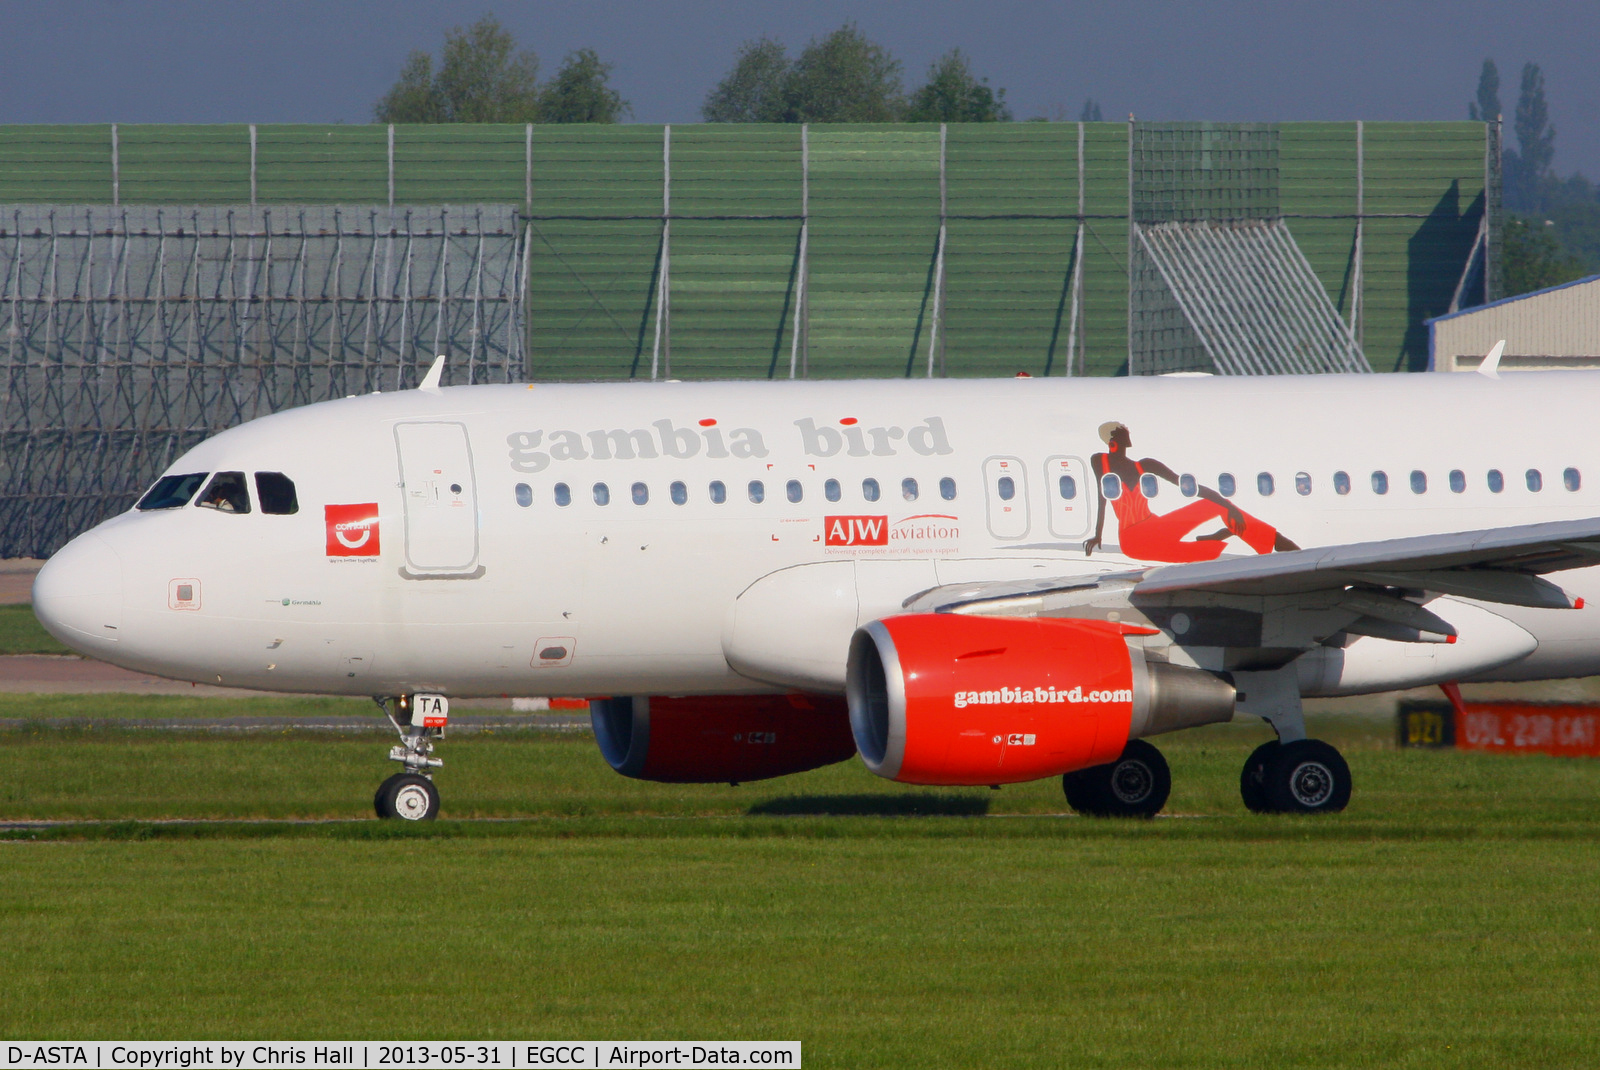 D-ASTA, 2011 Airbus A319-112 C/N 4663, Germania A319 in Gambia Bird livery